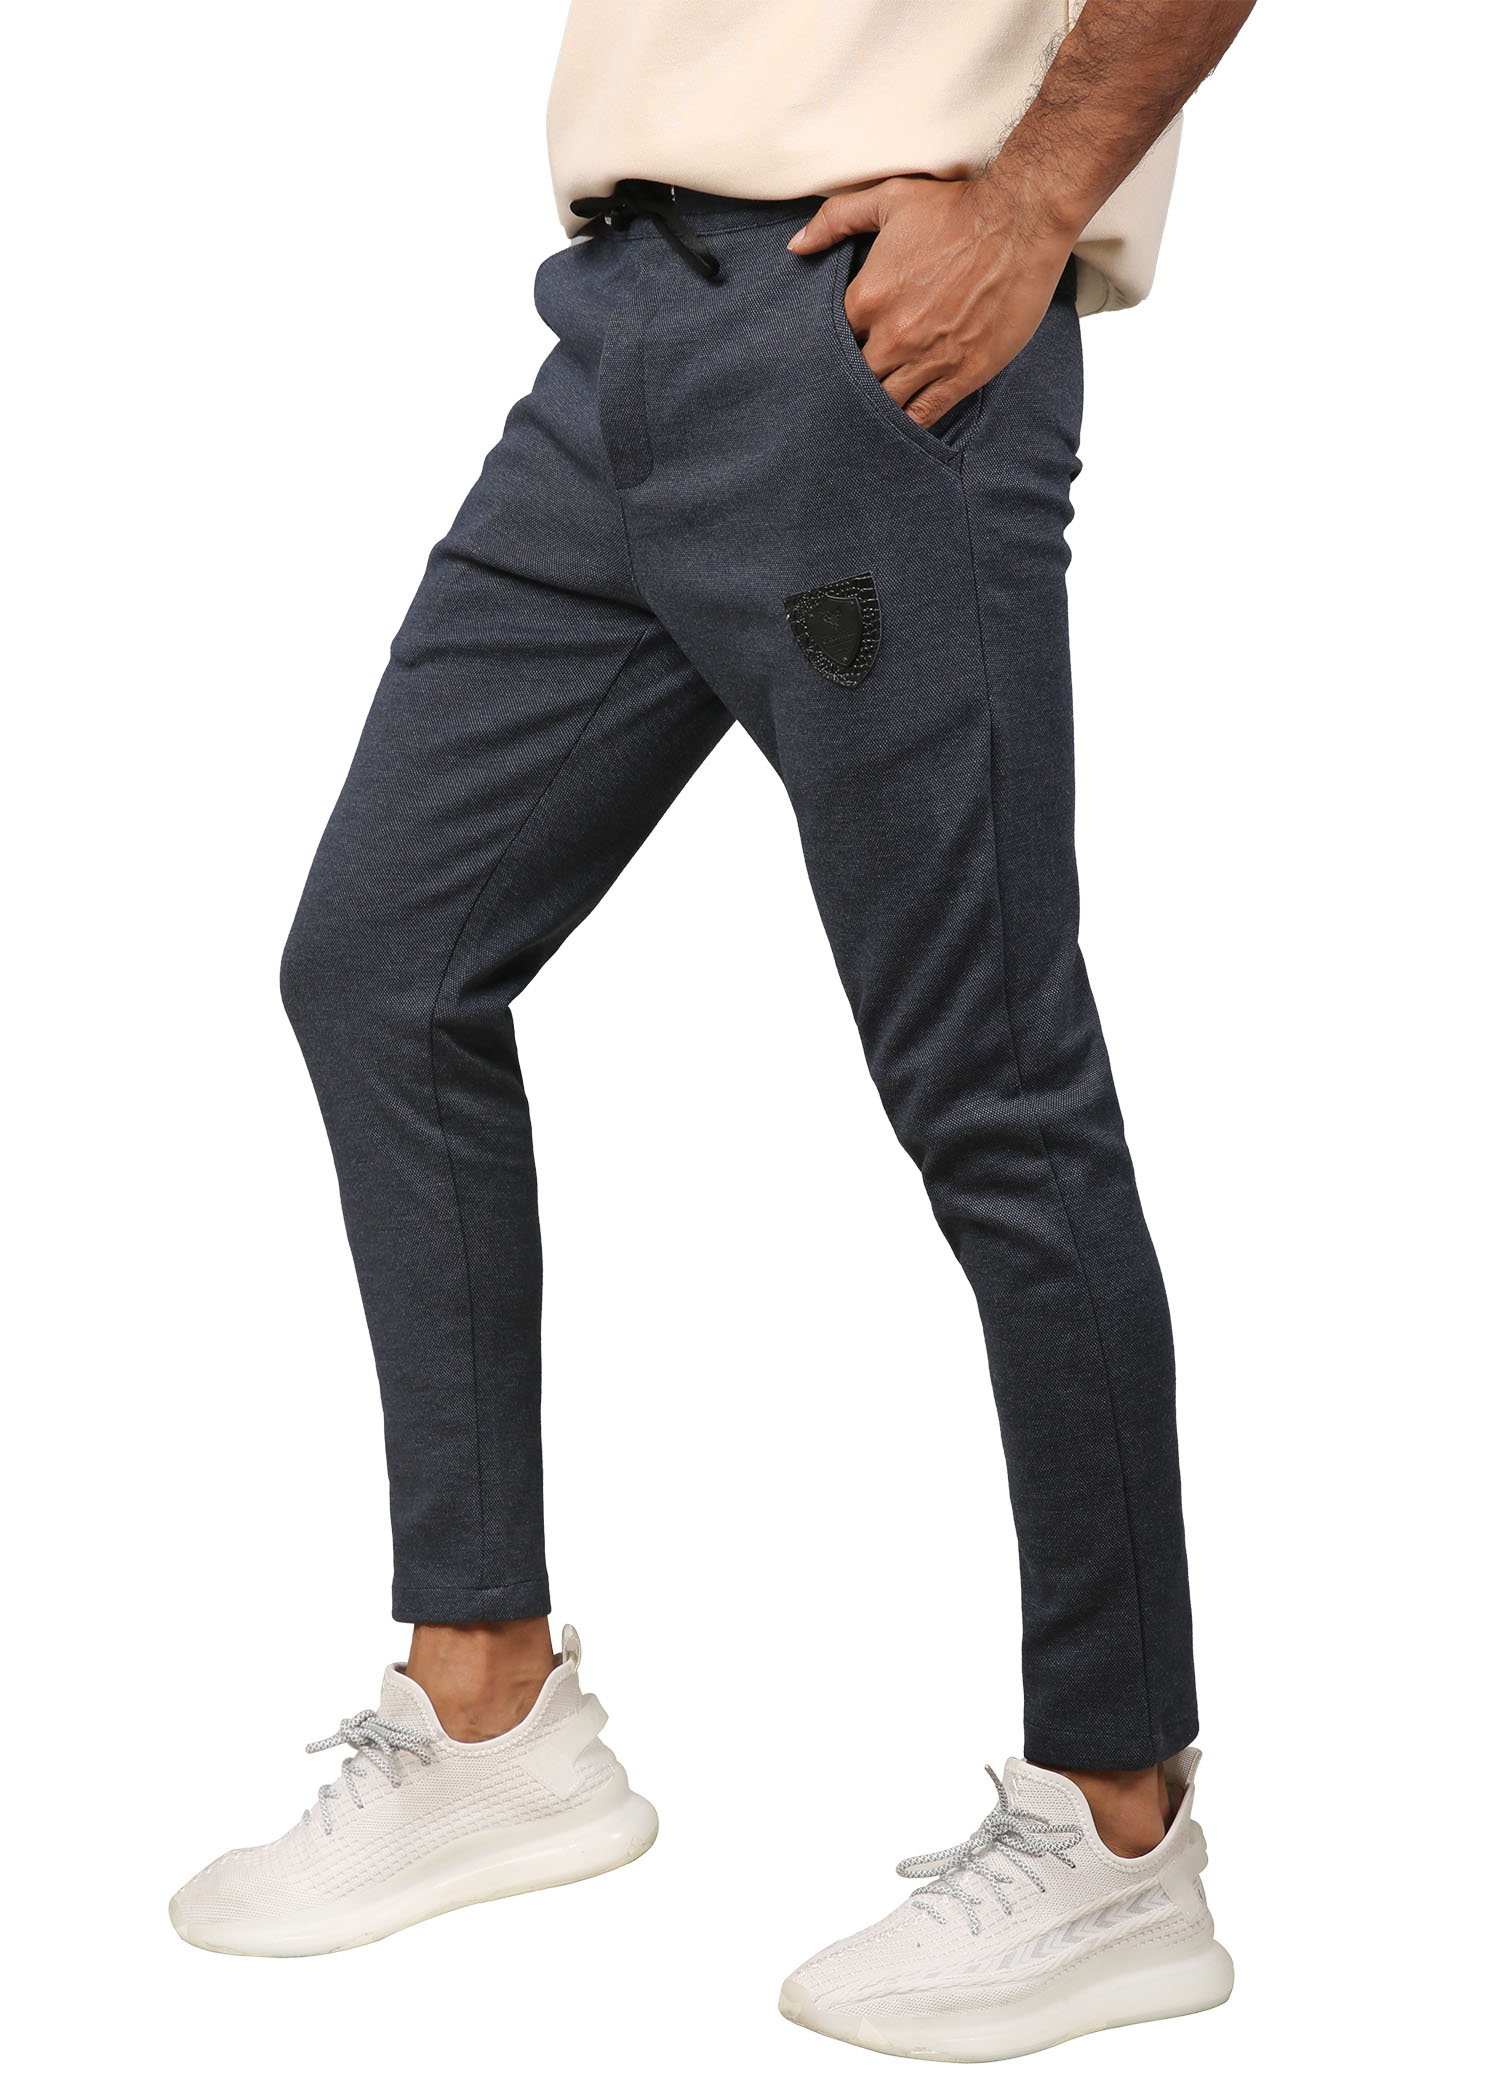 TANJIM LIMITED EDITION JOGGERS